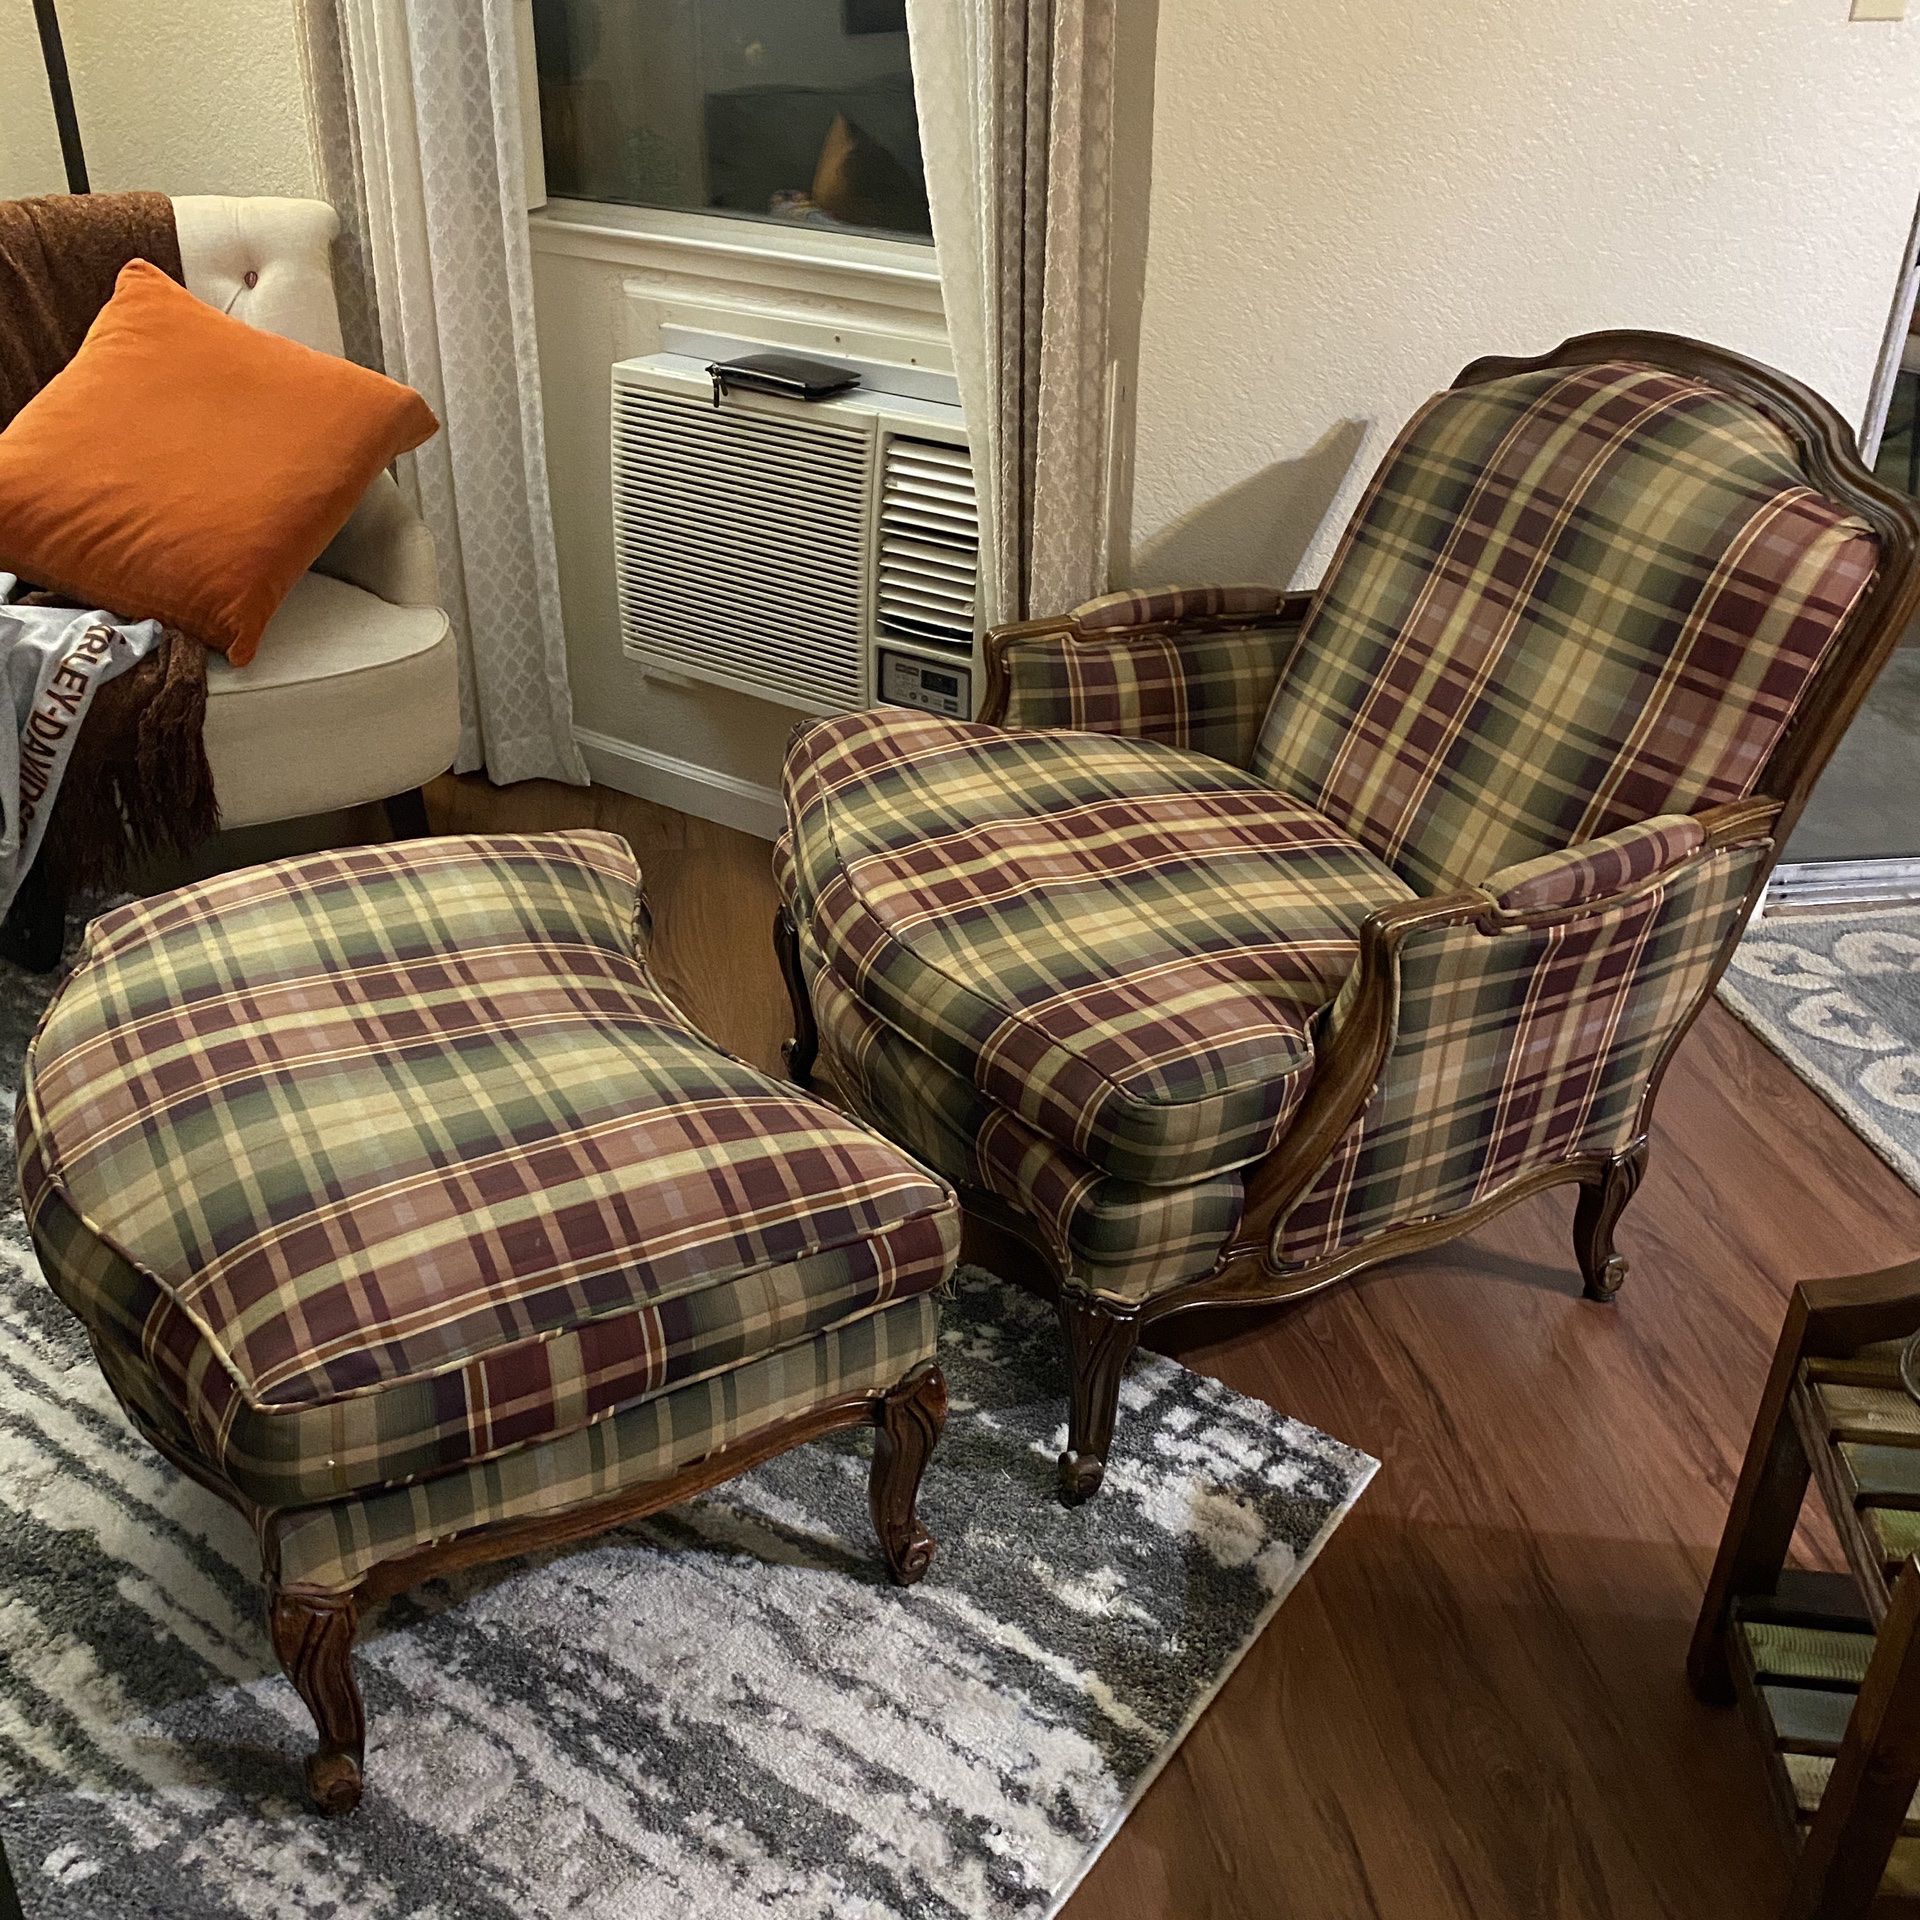 Vintage Ralph Lauren Chair With Ottoman for Sale in Modesto, CA - OfferUp